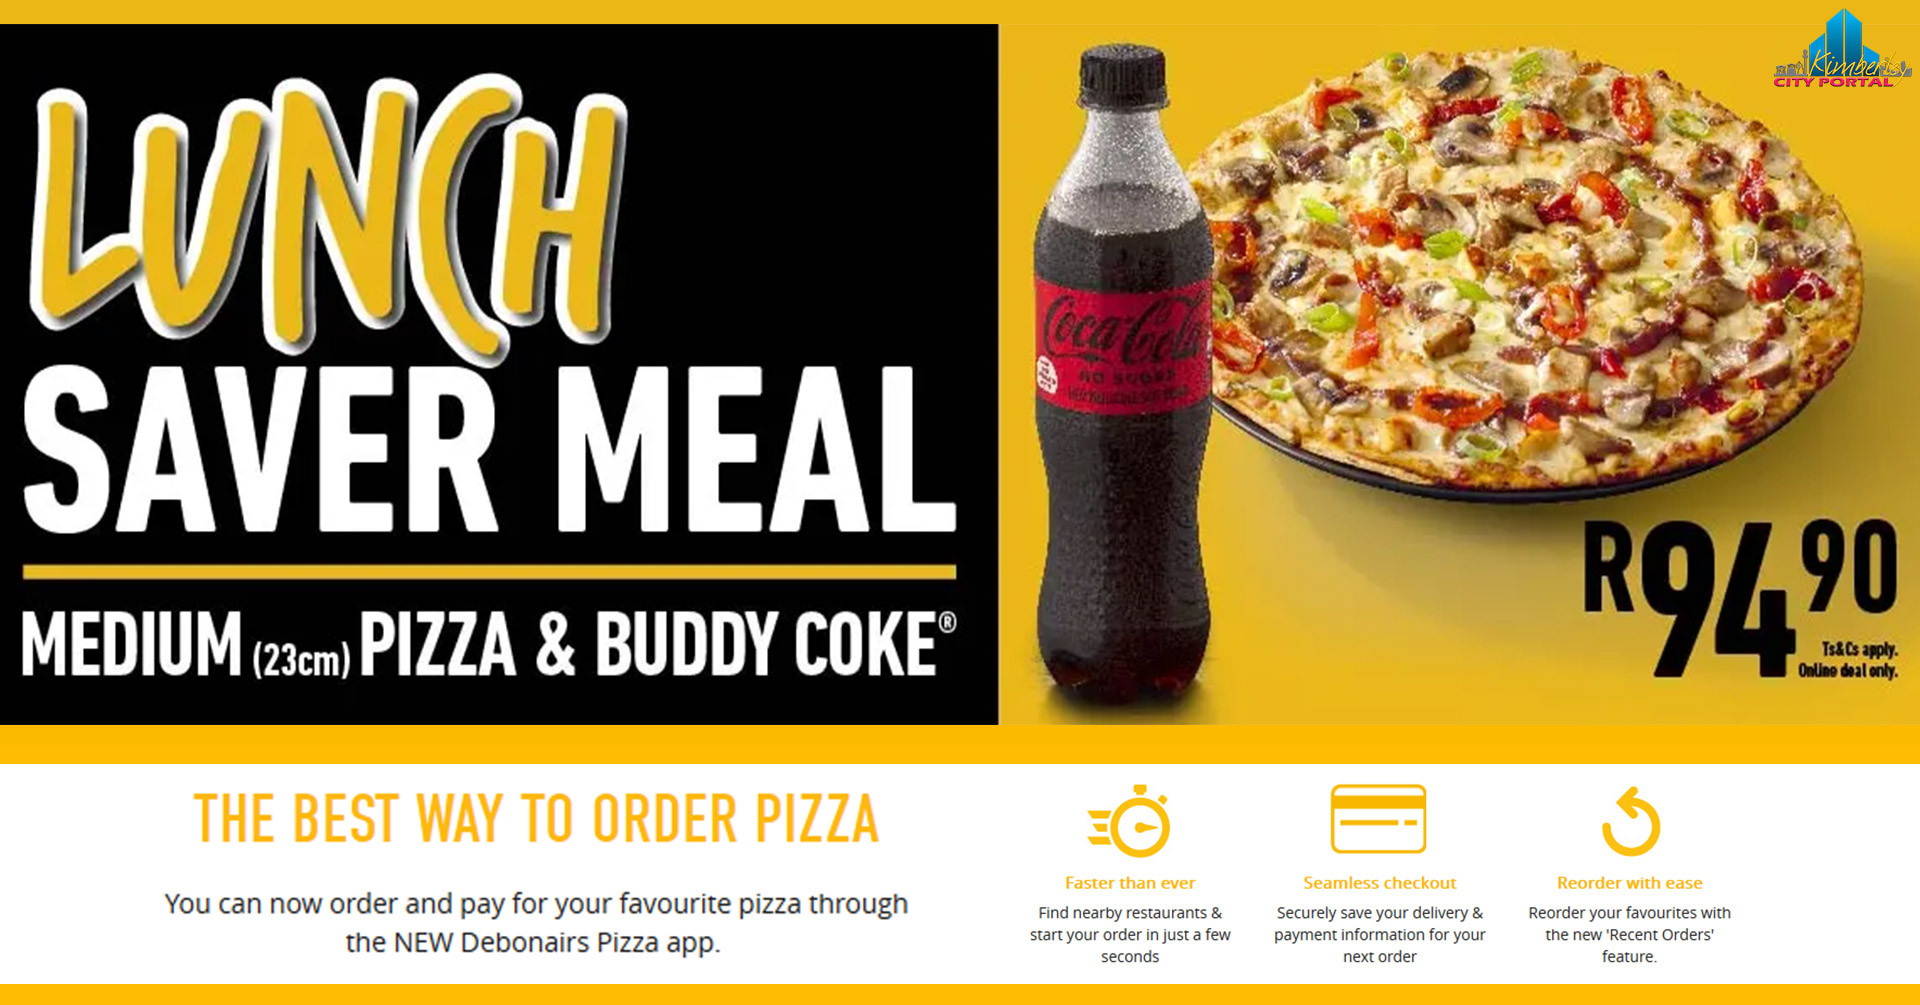 Lunch Saver Meal Promotion @ Debonairs